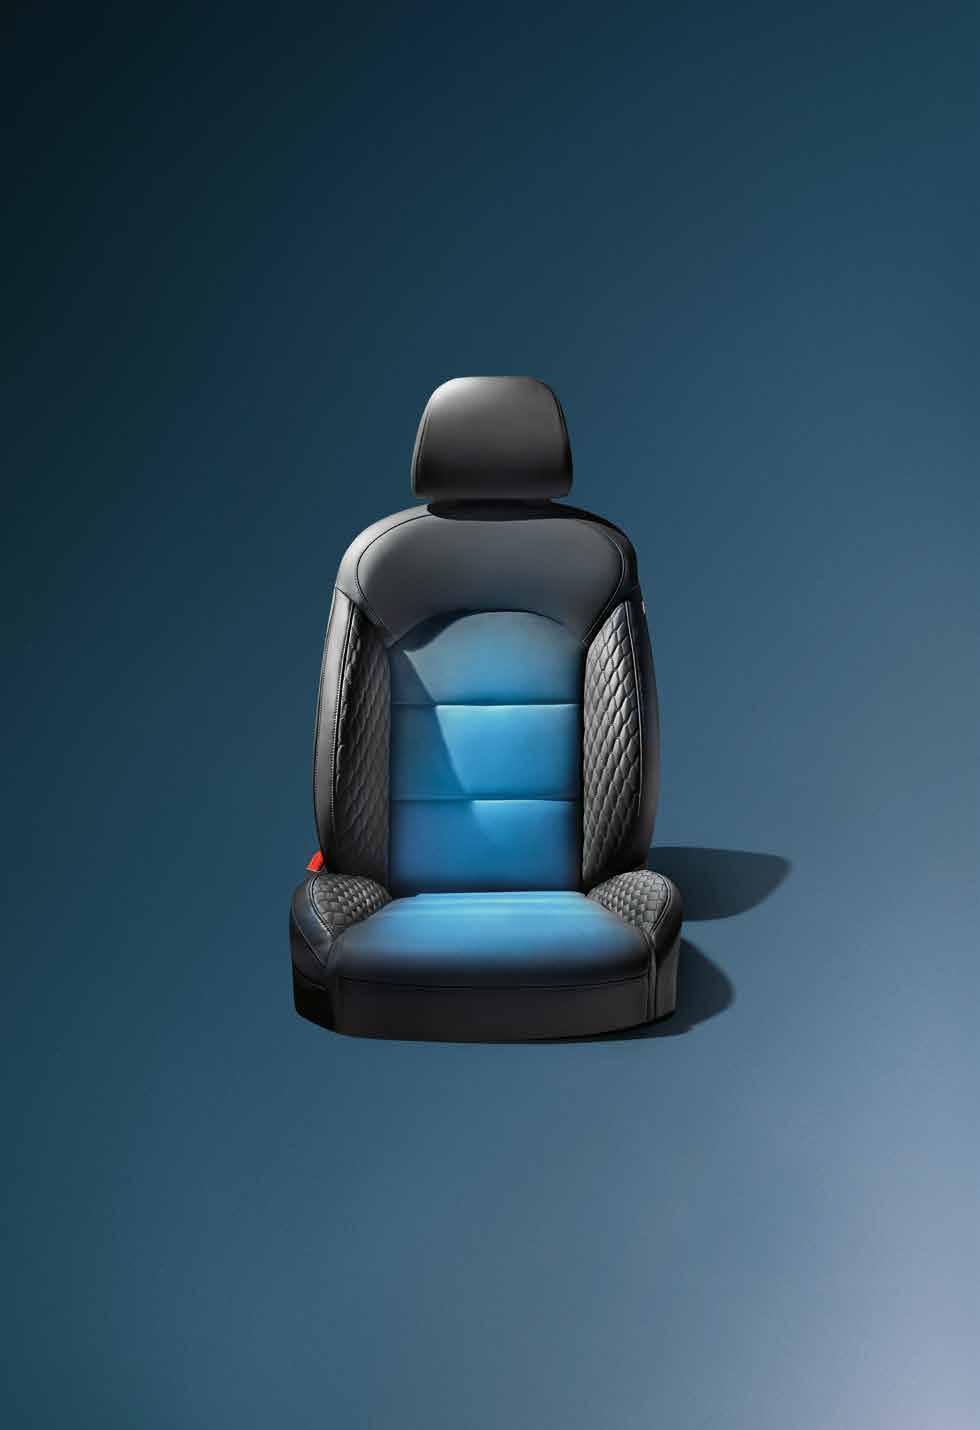 Find your own COMFORT ZONE While driving, temperature control equals comfort. Cadenza obliges with personalized controls for seating and cabin temperature. KIA.